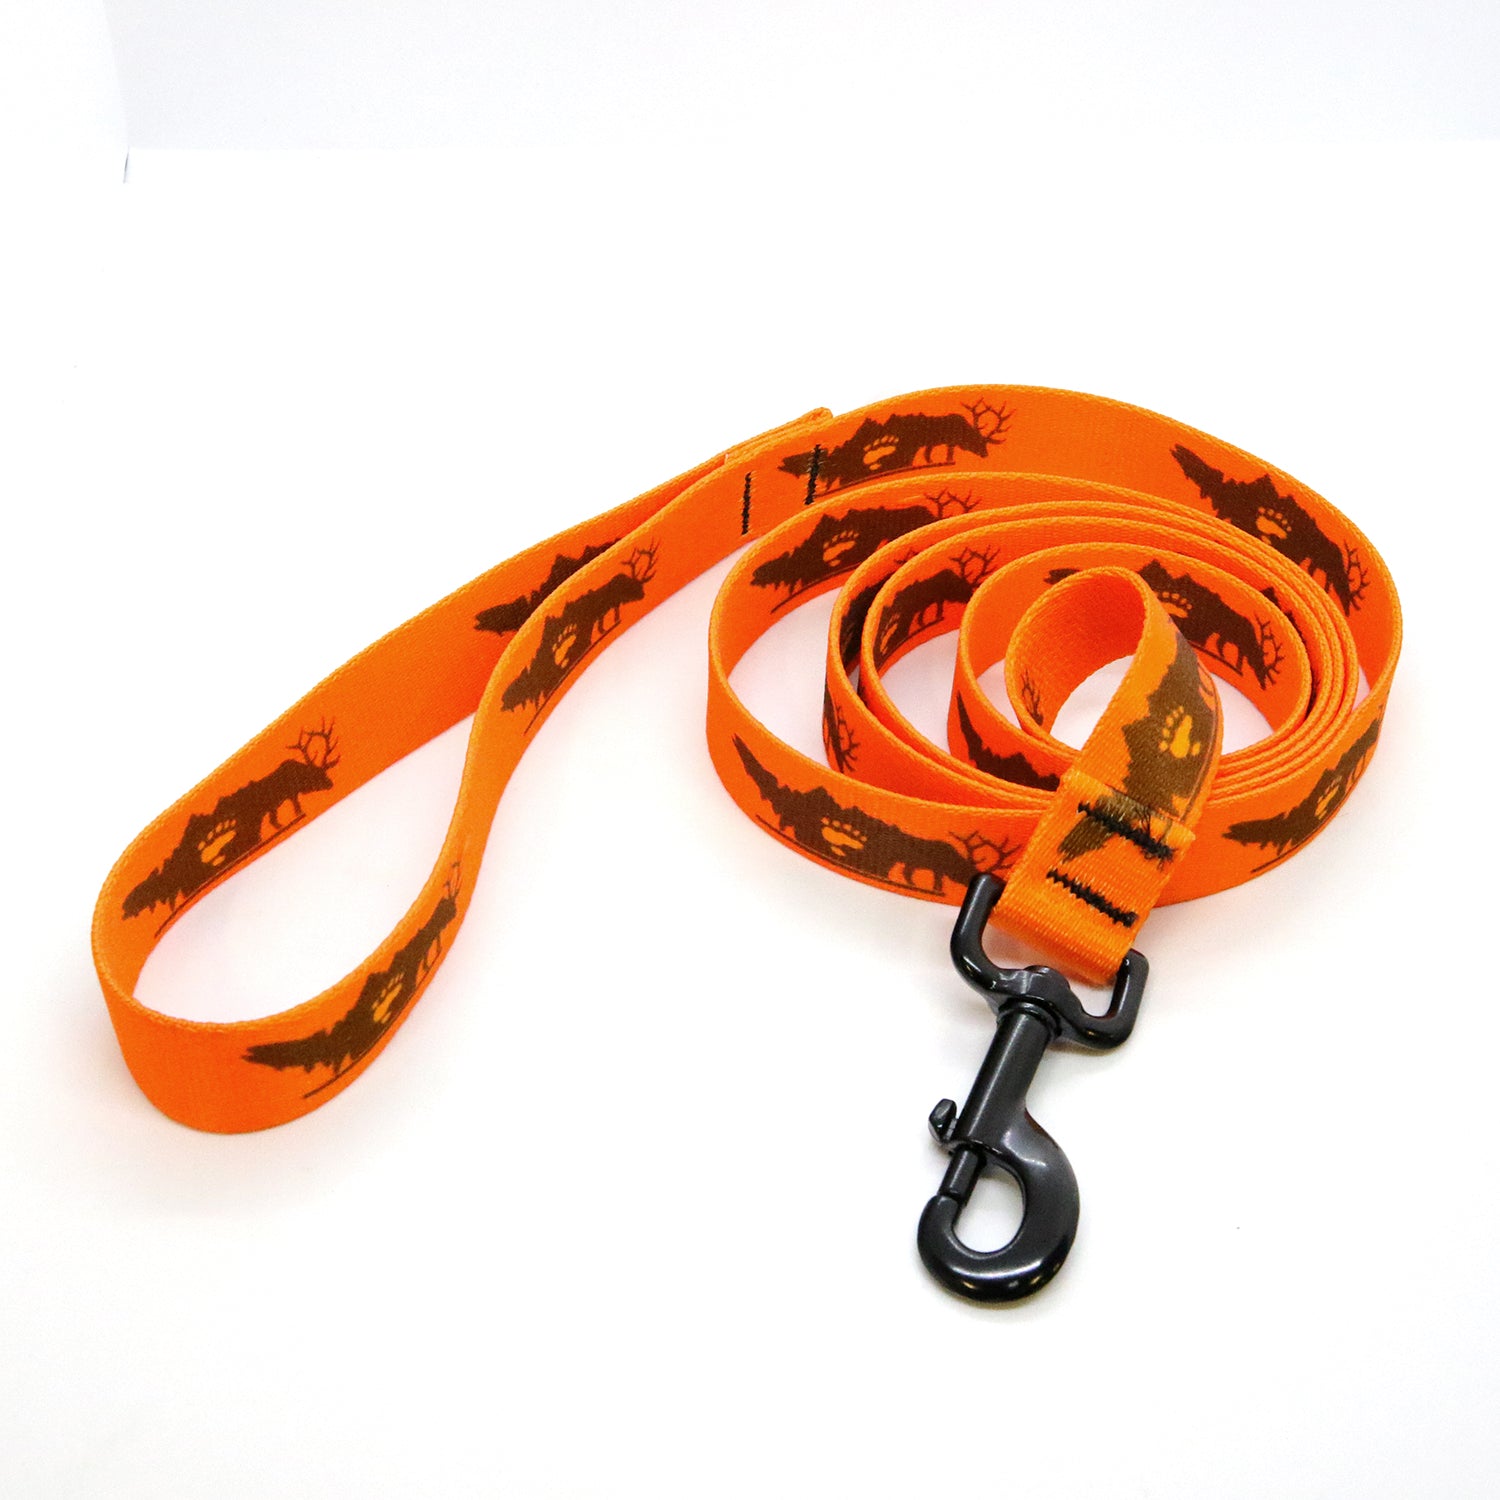 An orange dog leash with a design of a trout bear paw and elk is shown